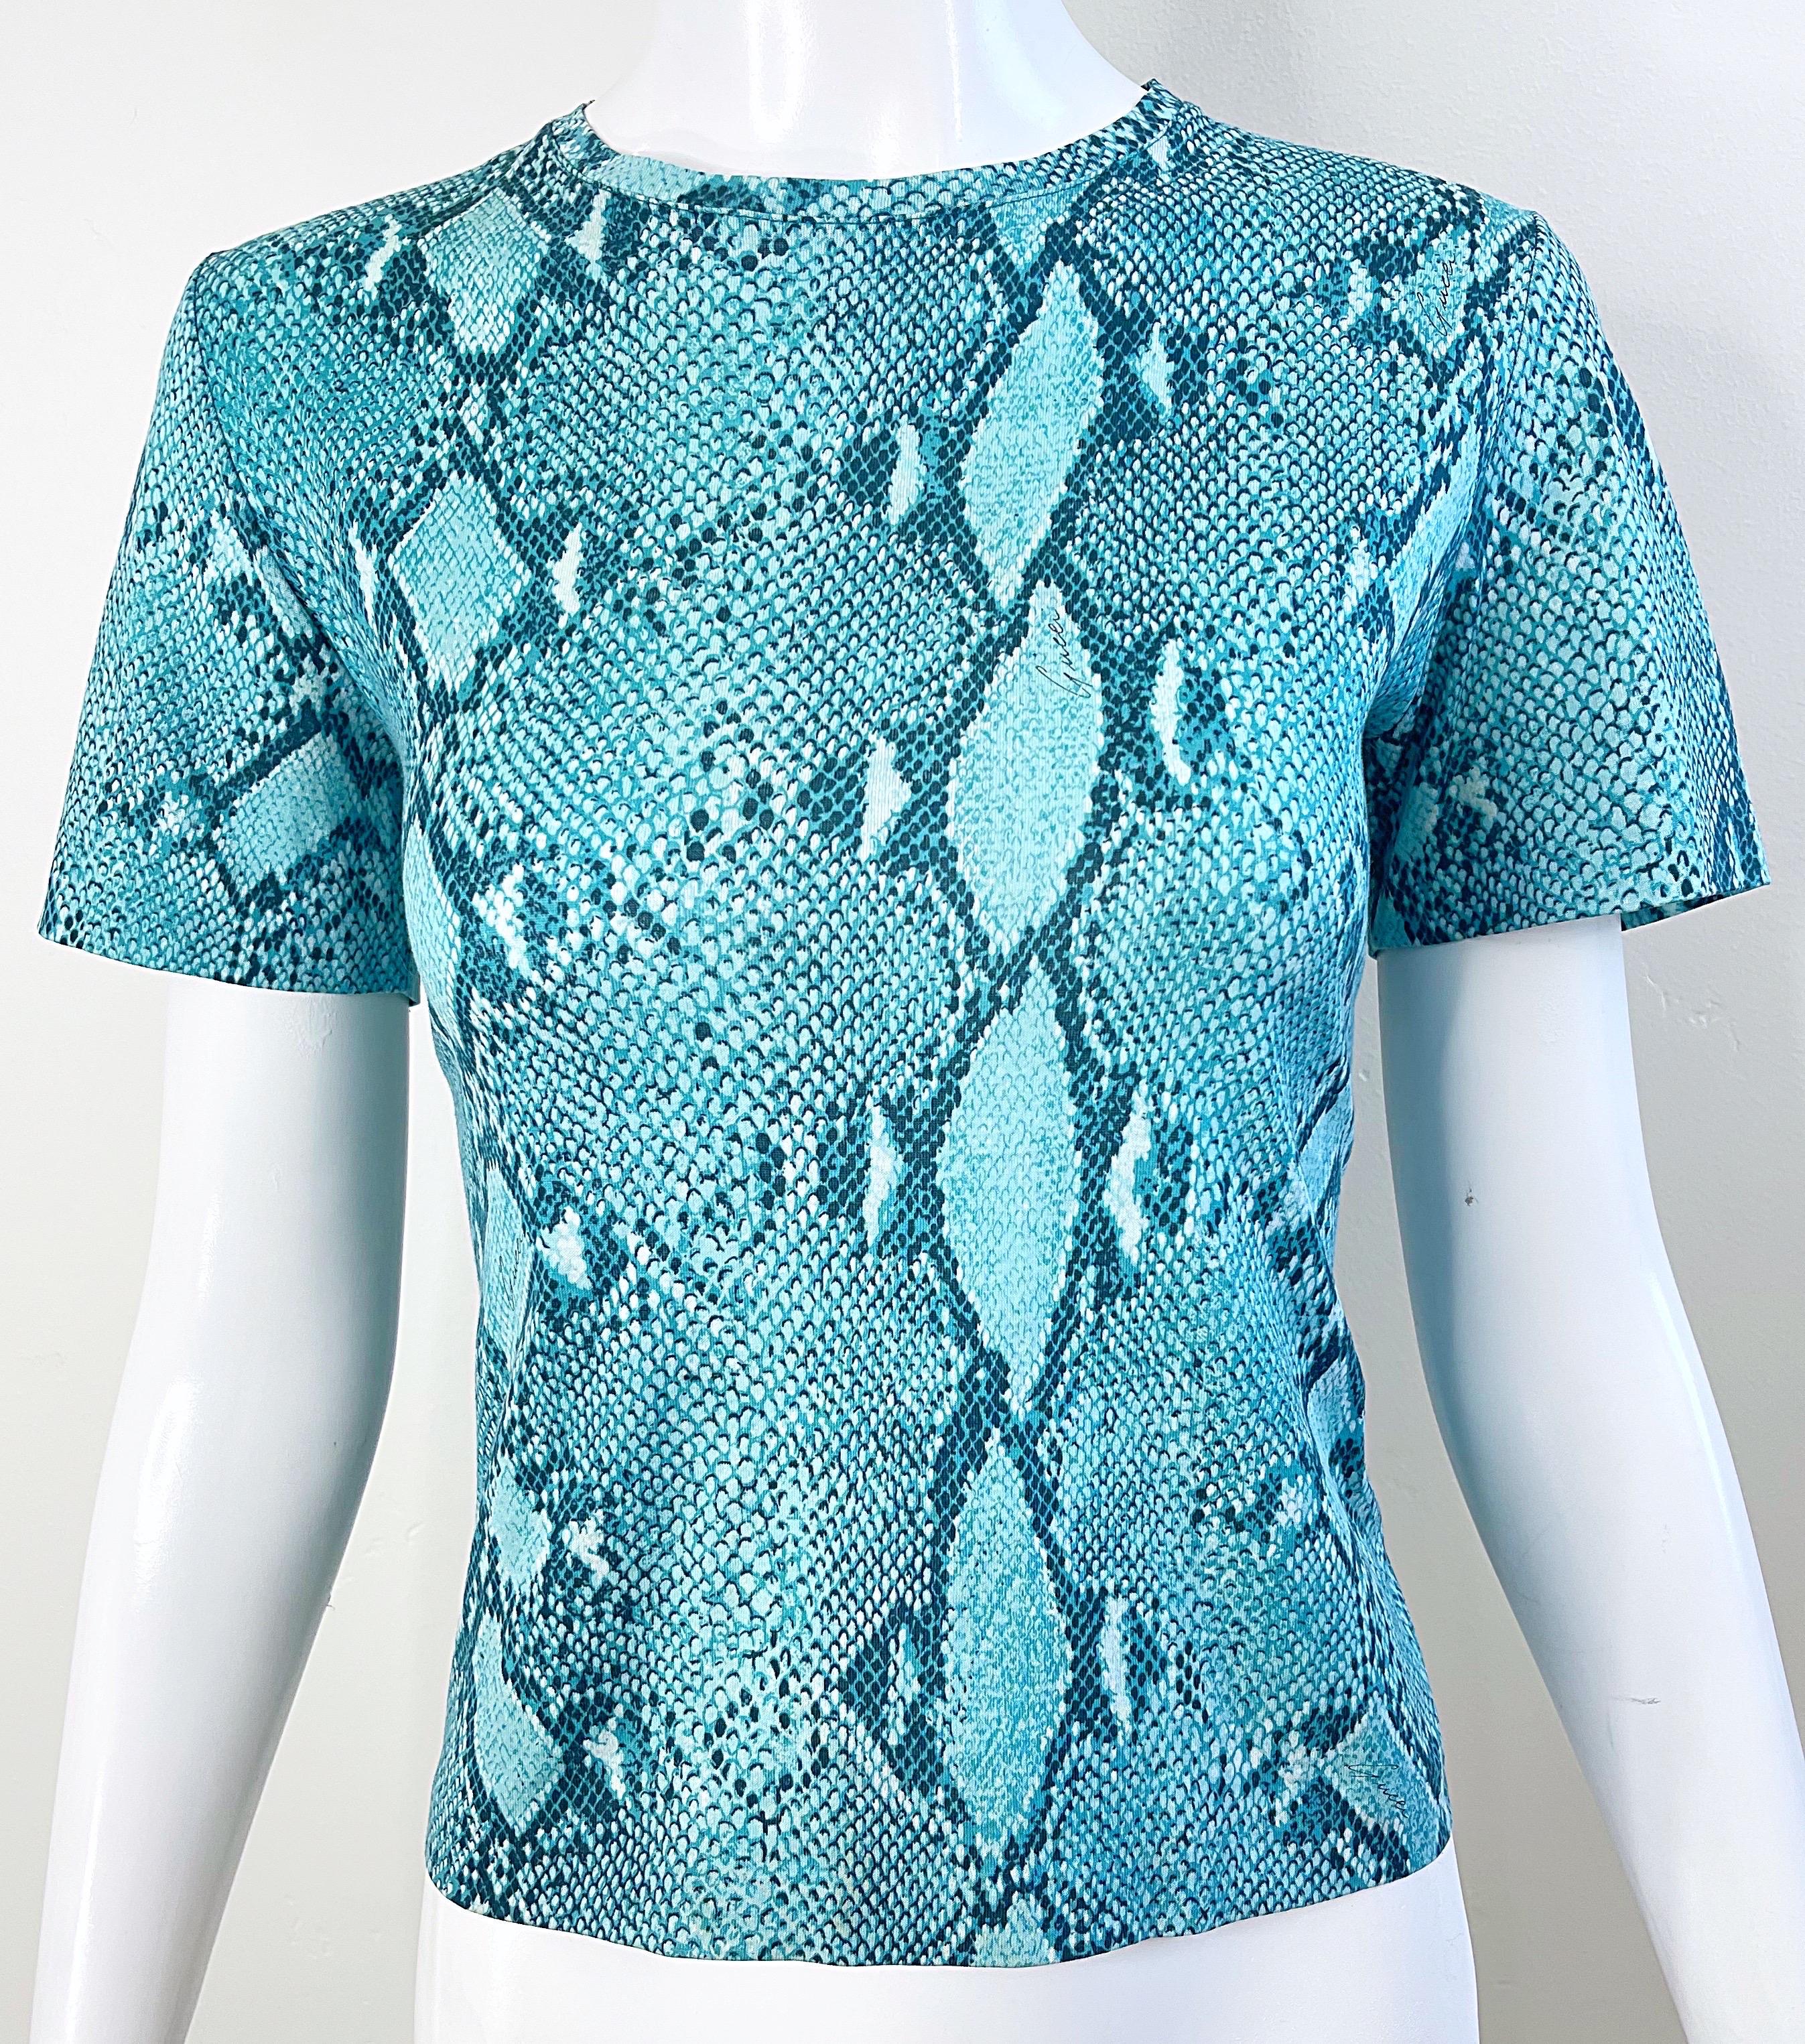 Gucci by Tom Ford Spring 2000 Turquoise Blue Snake Print Vintage Tee Shirt Y2K For Sale 5